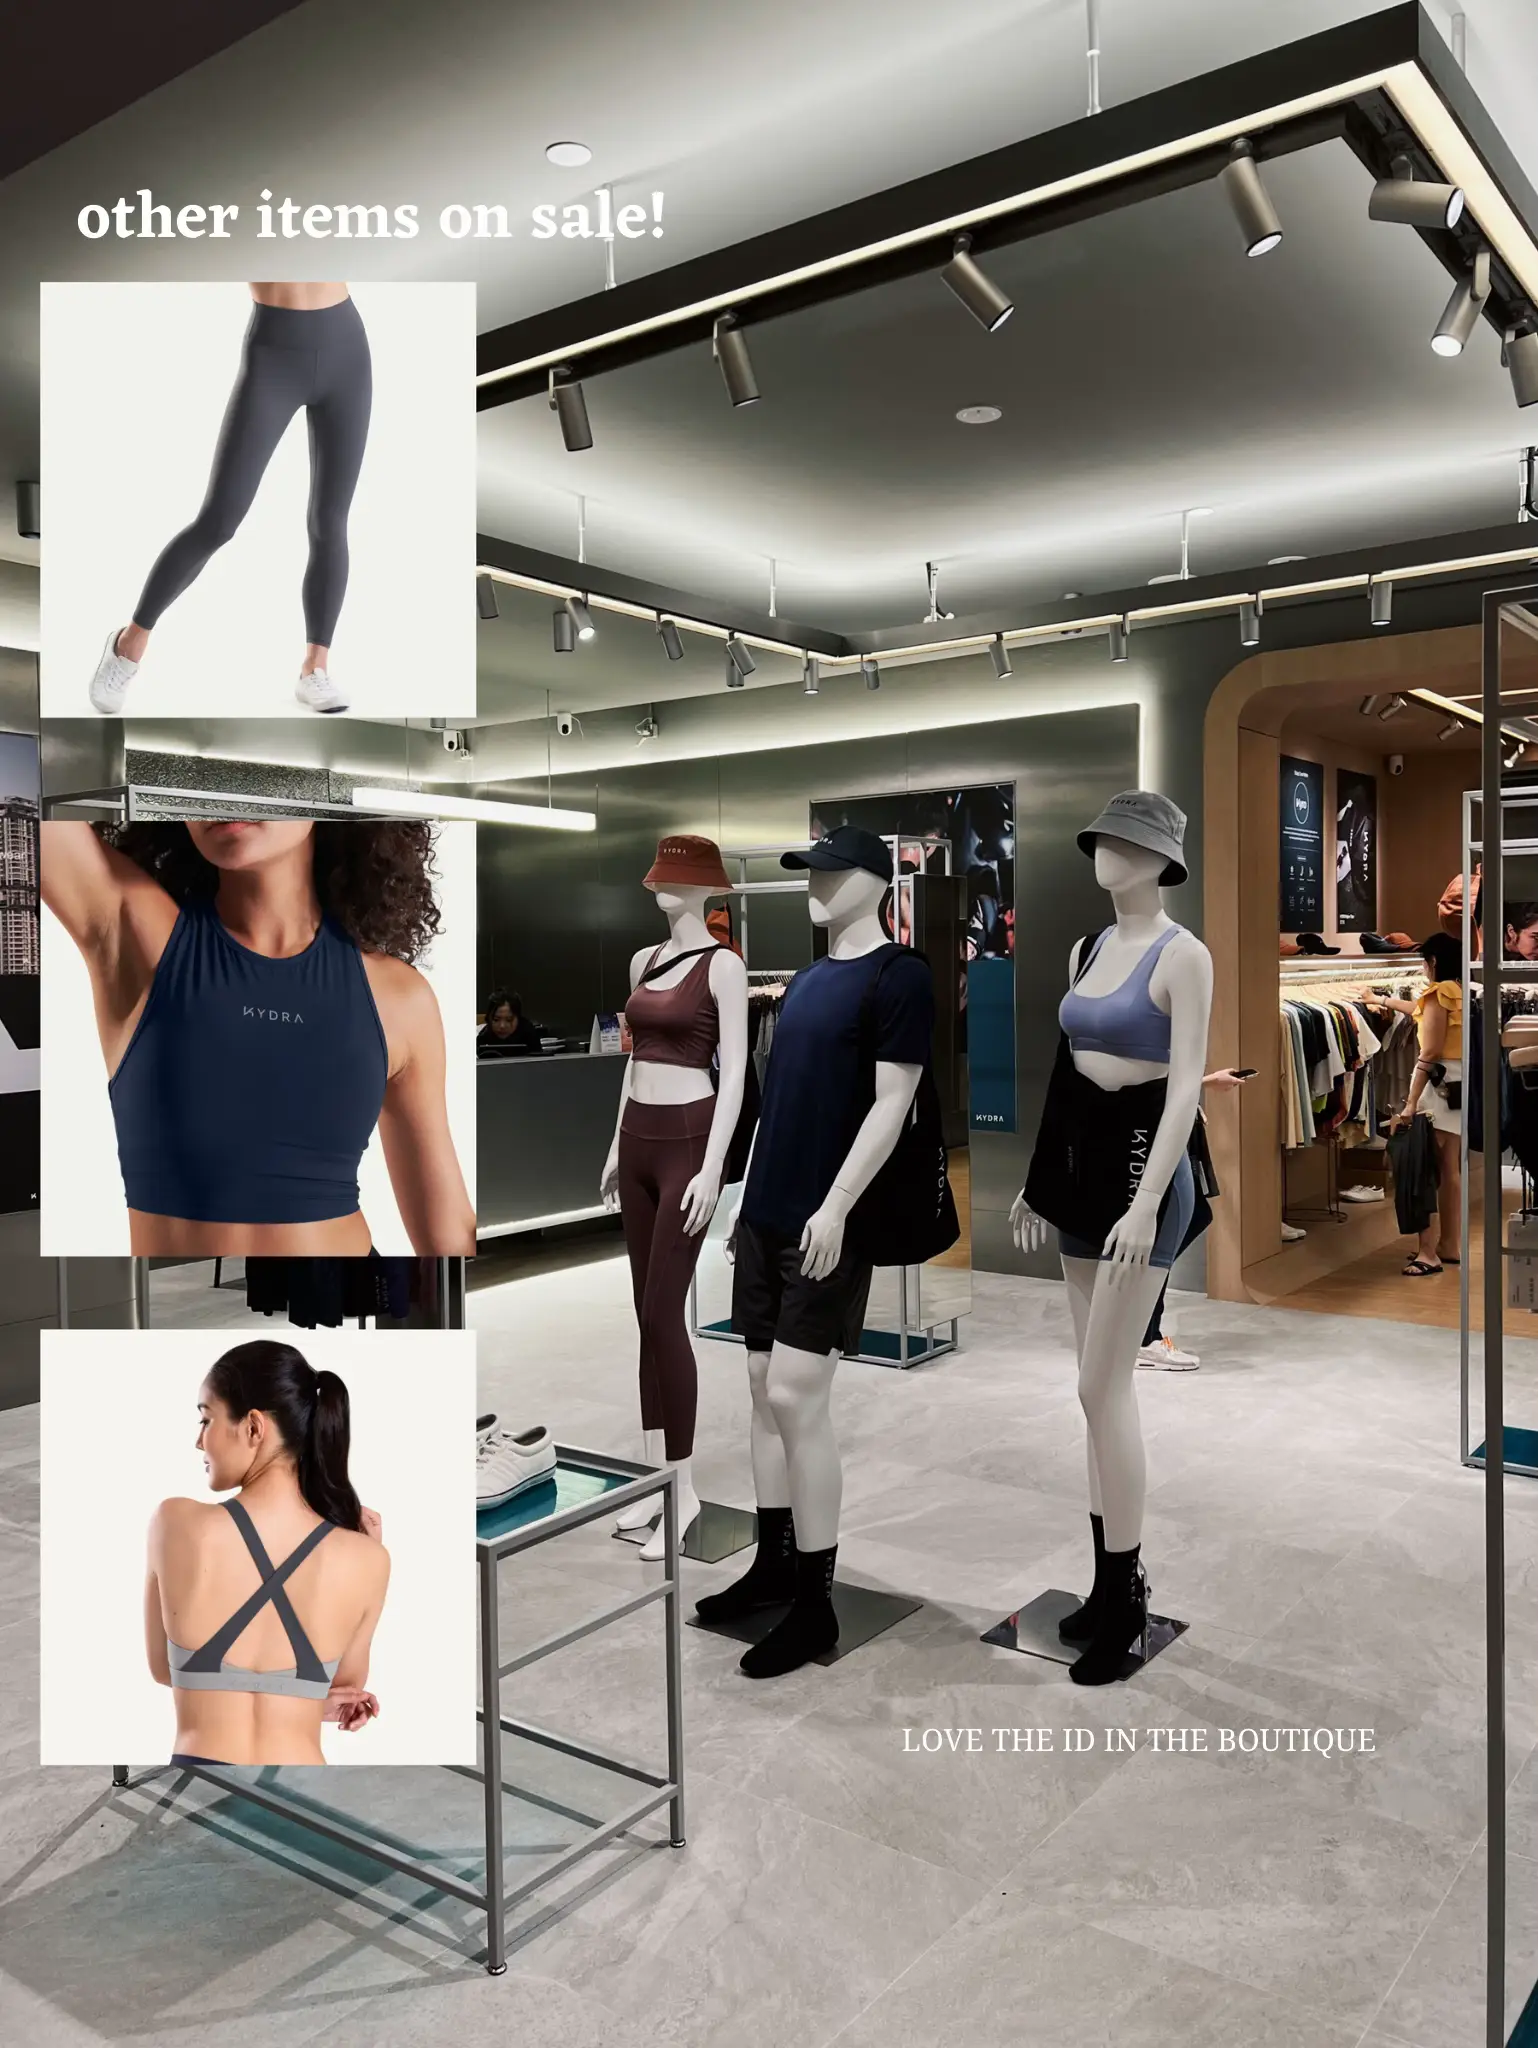 How Activewear Brand KYDRA Created a Community with their Loyalty Program